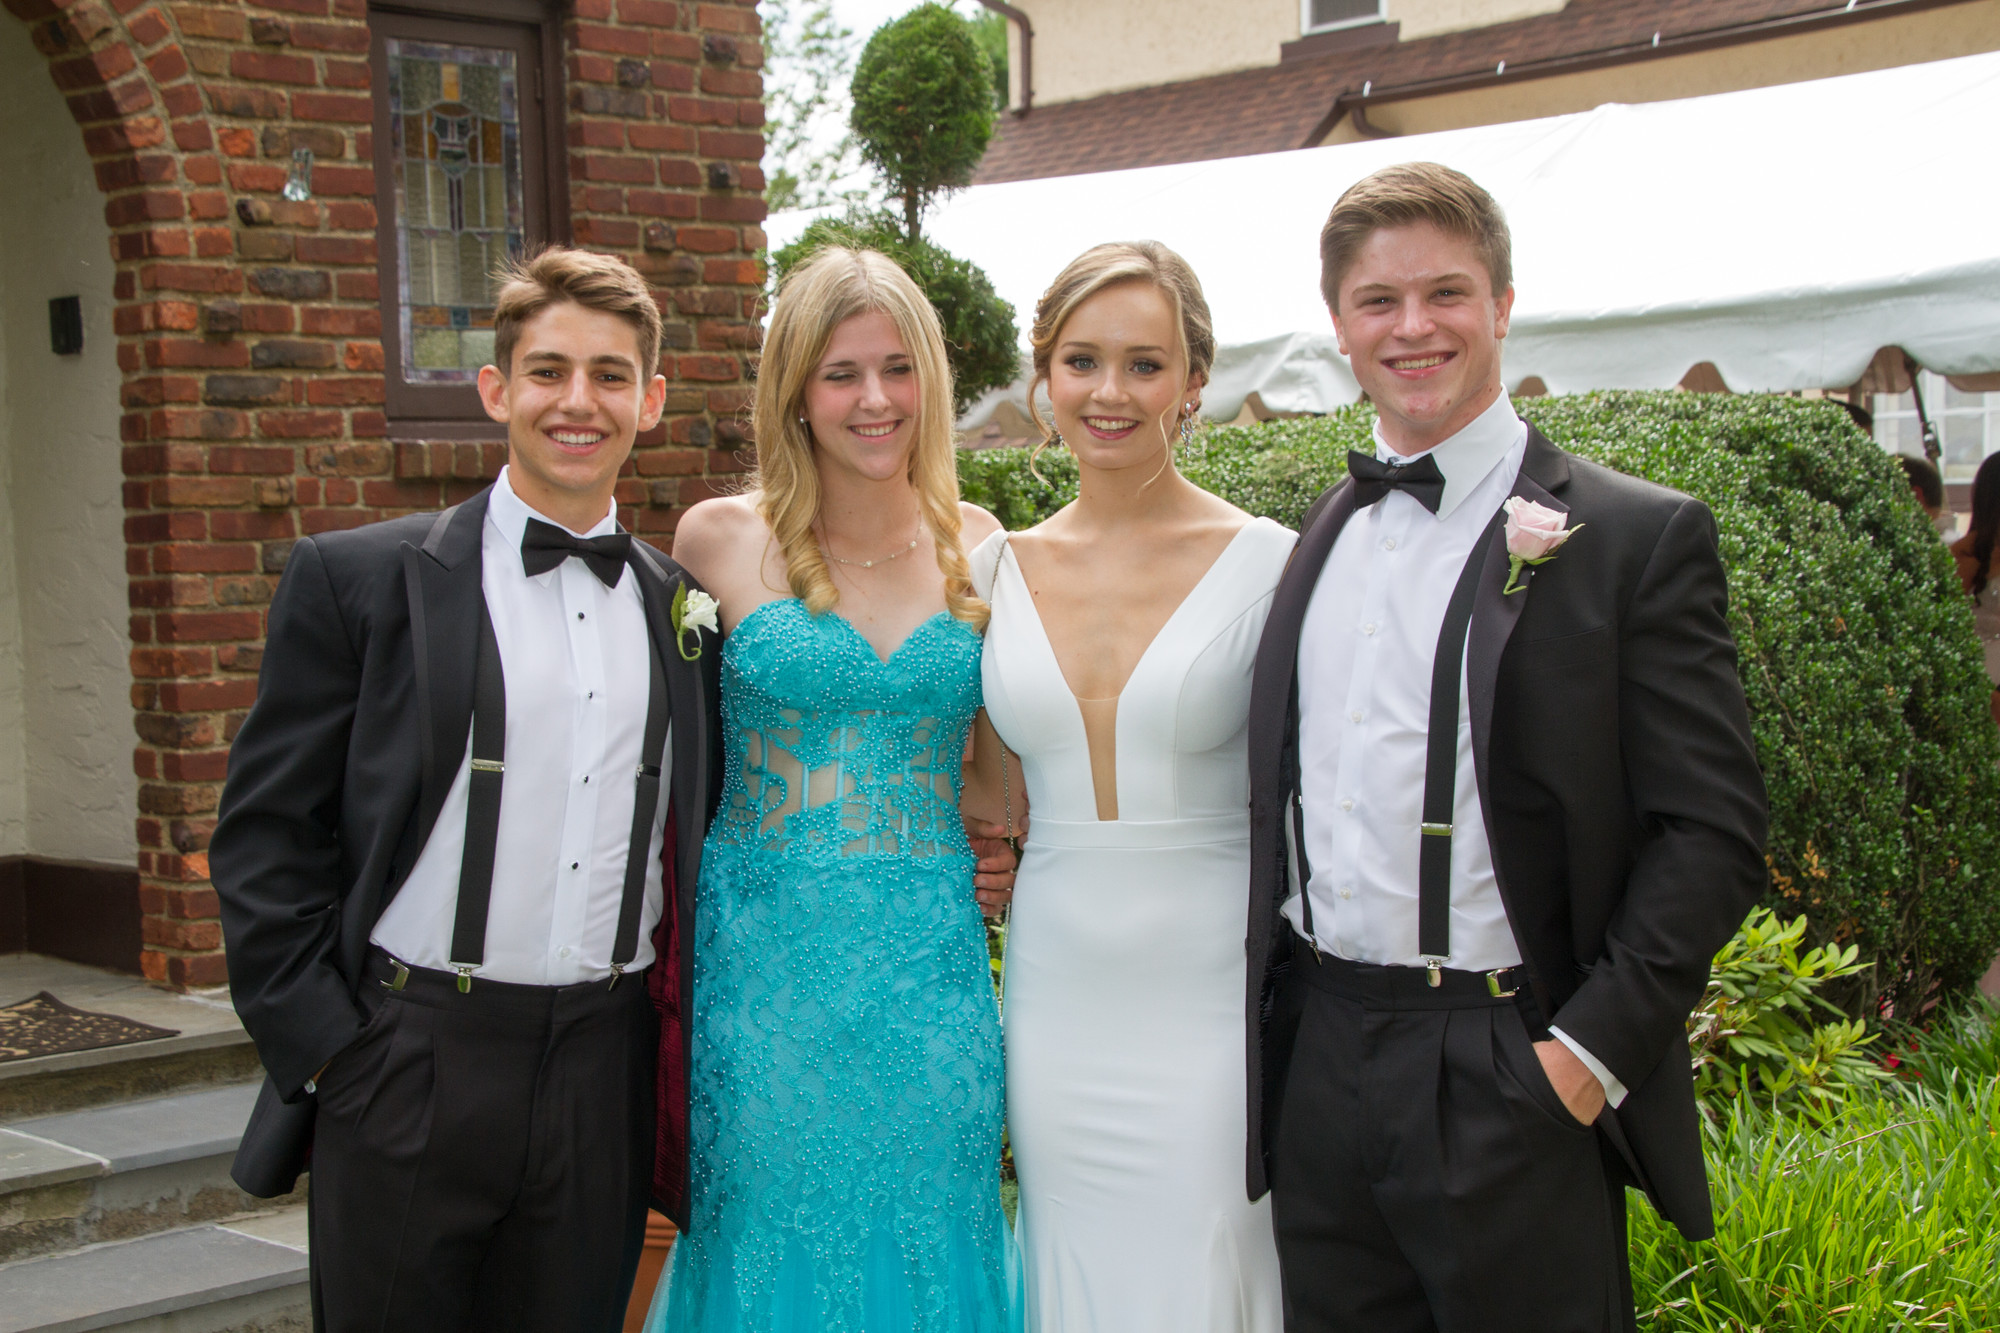 Alan Khyakin, Mara Stewart, Fiona Garguilo and Bobby Stewart smiled for the camera at a pre-prom party.